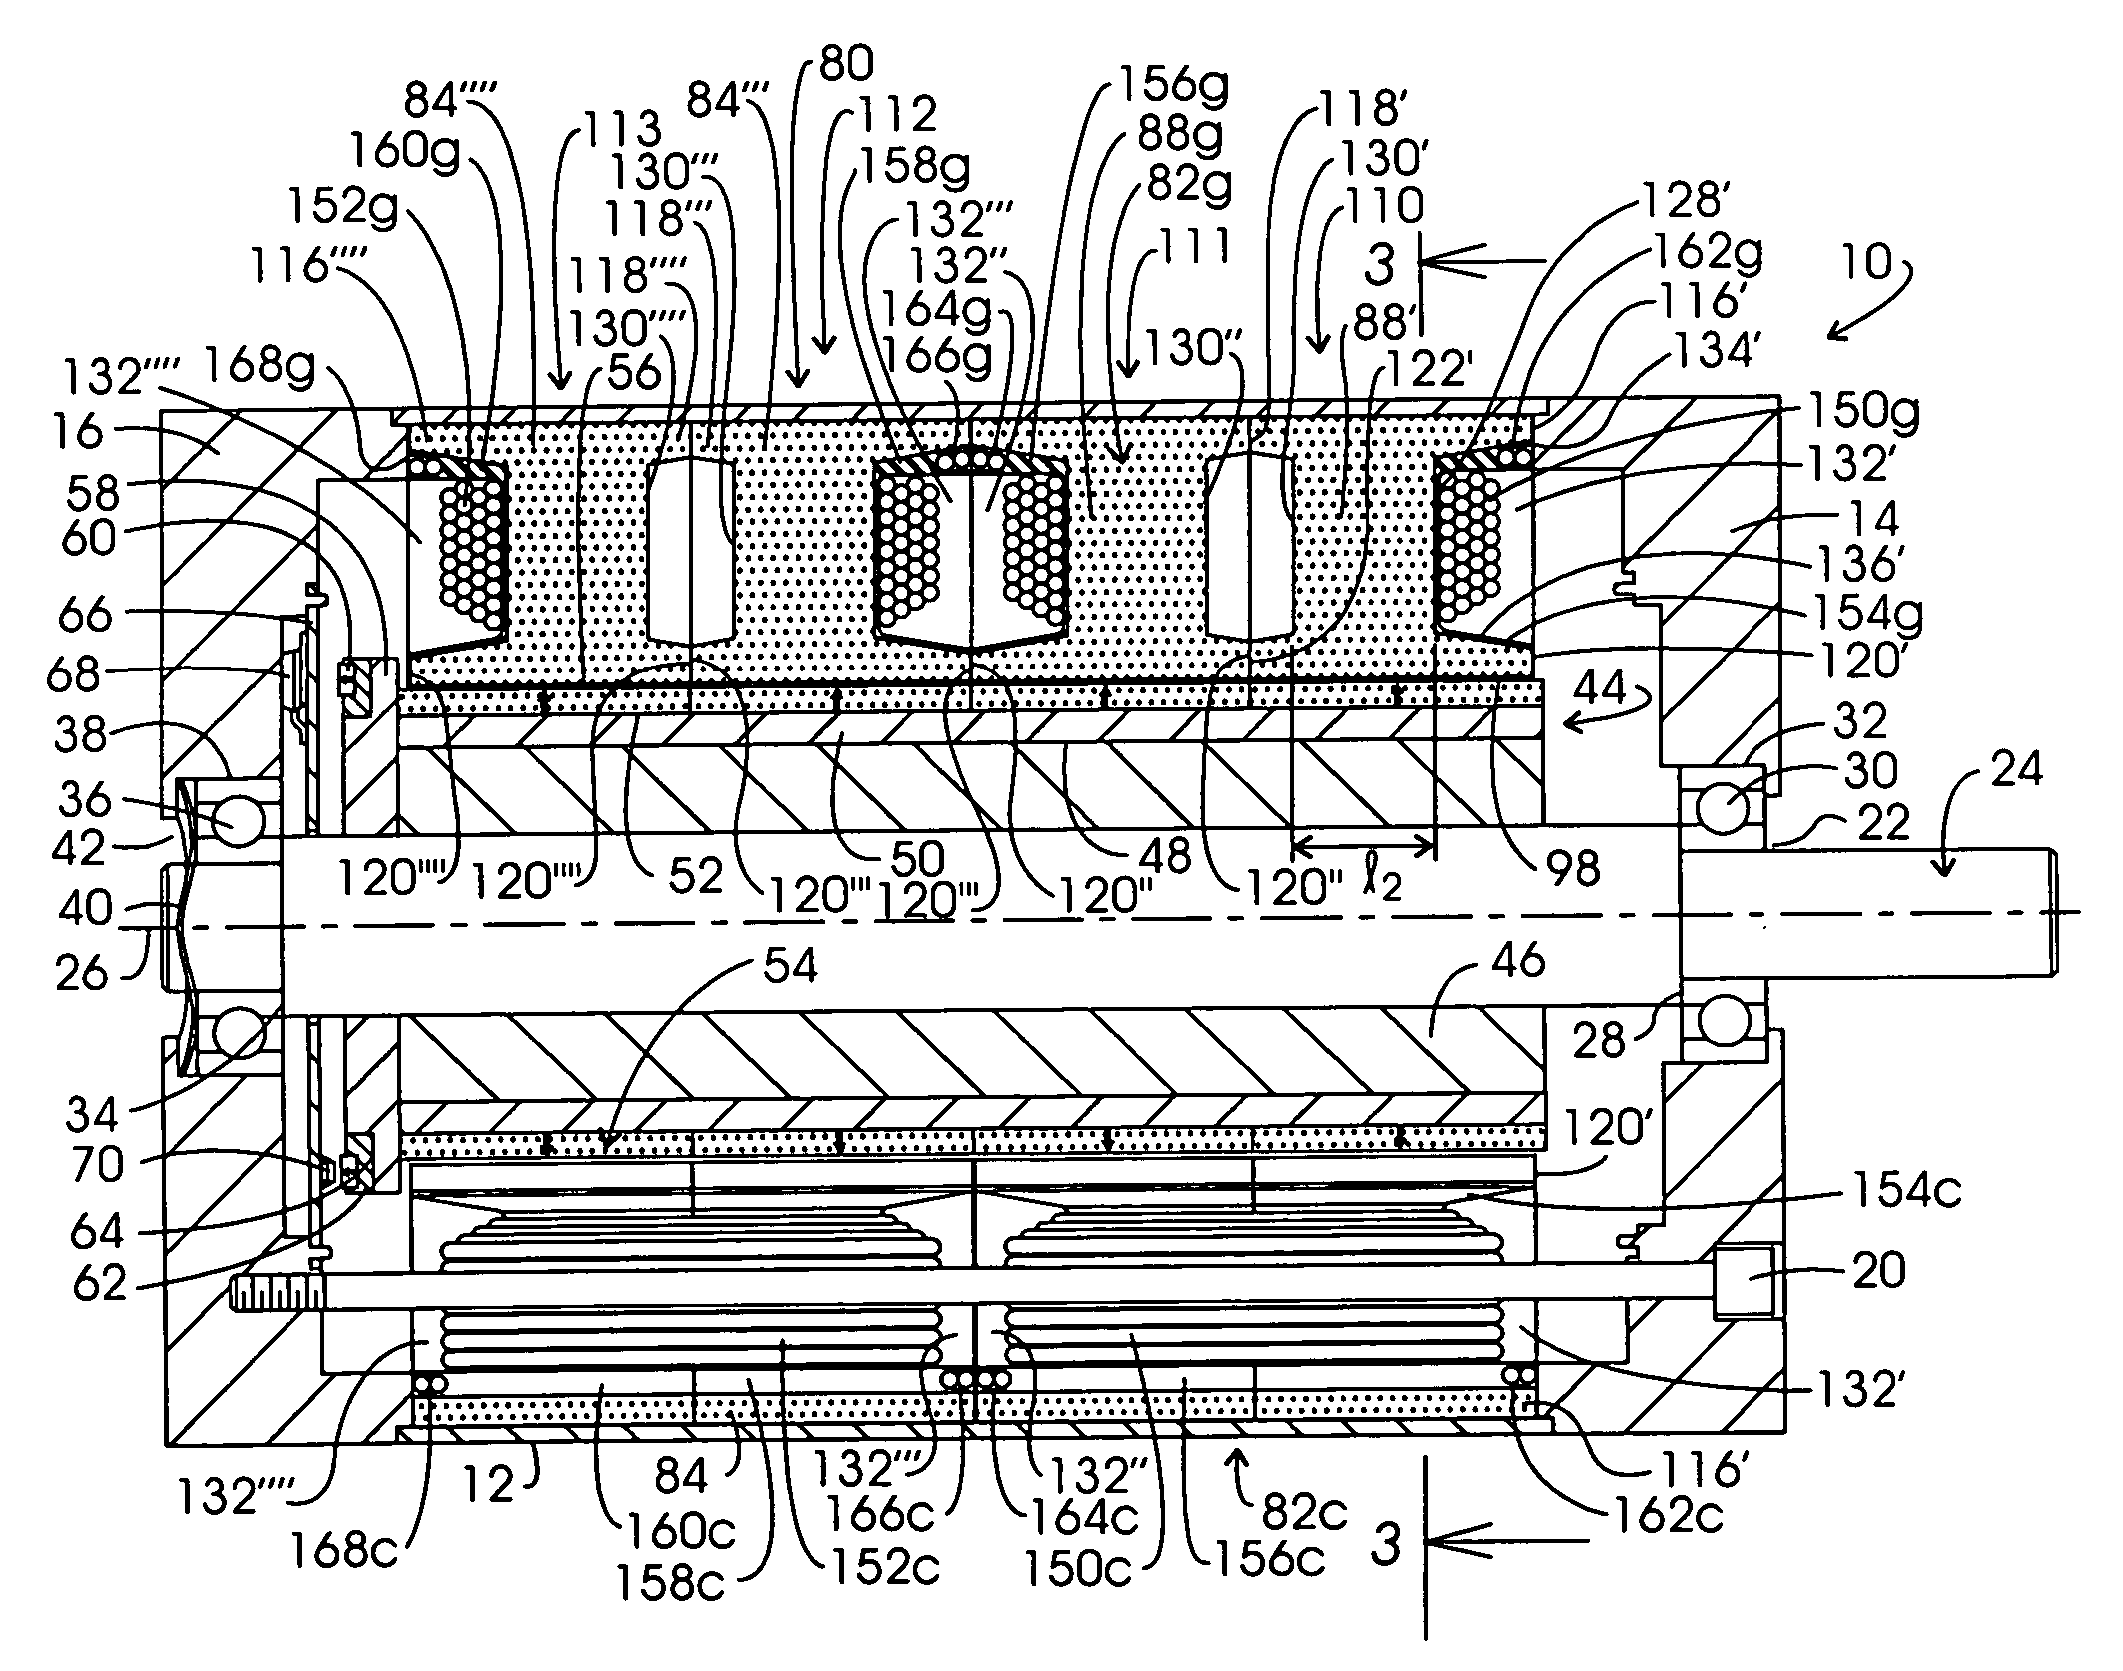 Electrodynamic apparatus and method of manufacture